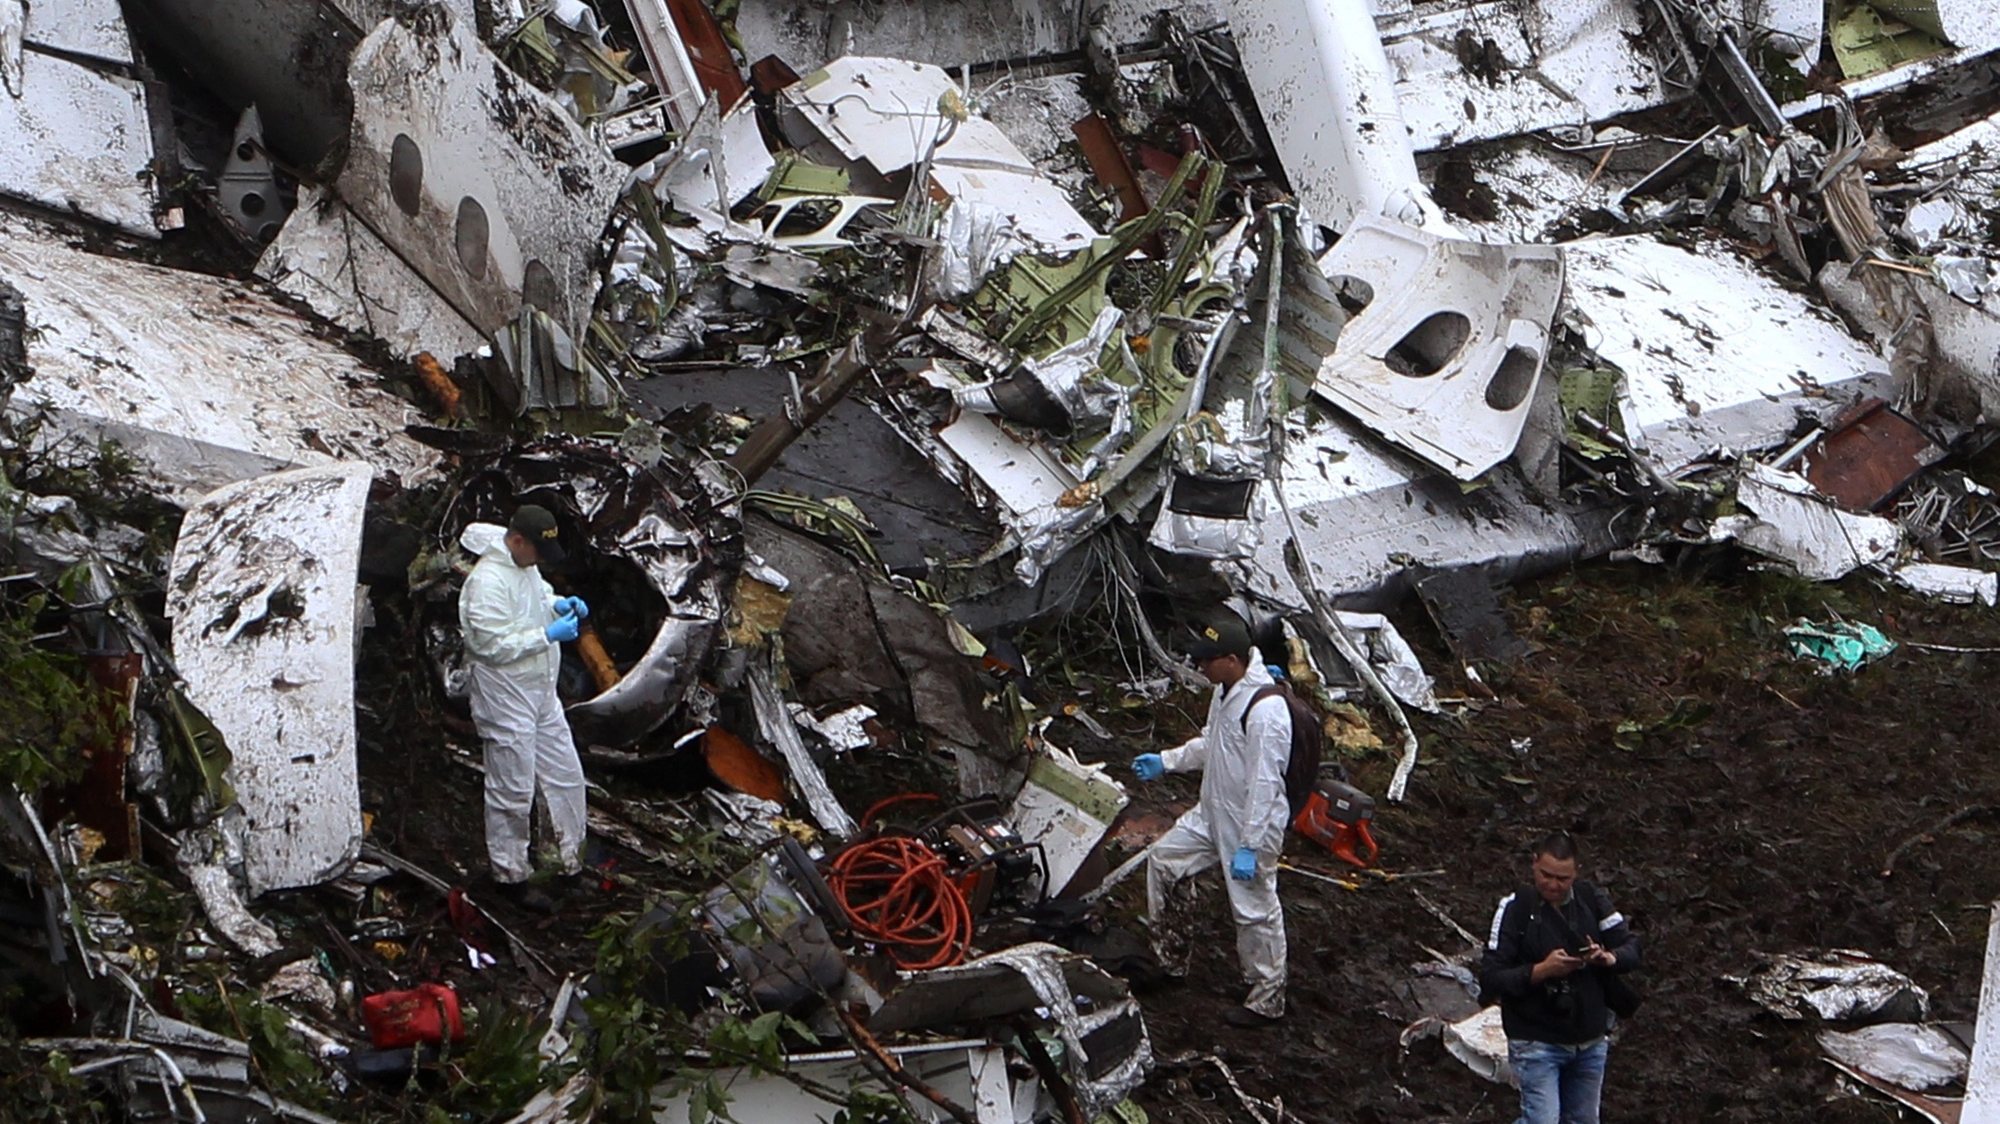 epaselect epa05652352 Rescue workers work at the scene of the plane crash in the municipality of La Union, Department of Antioquia, Colombia, 29 November 2016. According to reports, 75 people died when an aircraft crashed late 28 November 2016 with 81 people on board, including players of the Brazilian soccer club Chapecoense. The plane crashed in a mountainous area outside Medellin, Colombia as it was approaching the Jose Maria Cordoba airport. The cause of the incident is as yet uknown. Chapecoense were scheduled to play in the Copa Sudamericana final against Medellin&#039;s Atletico Nacional on 30 November 2016.  EPA/LUIS EDUARDO NORIEGA A.